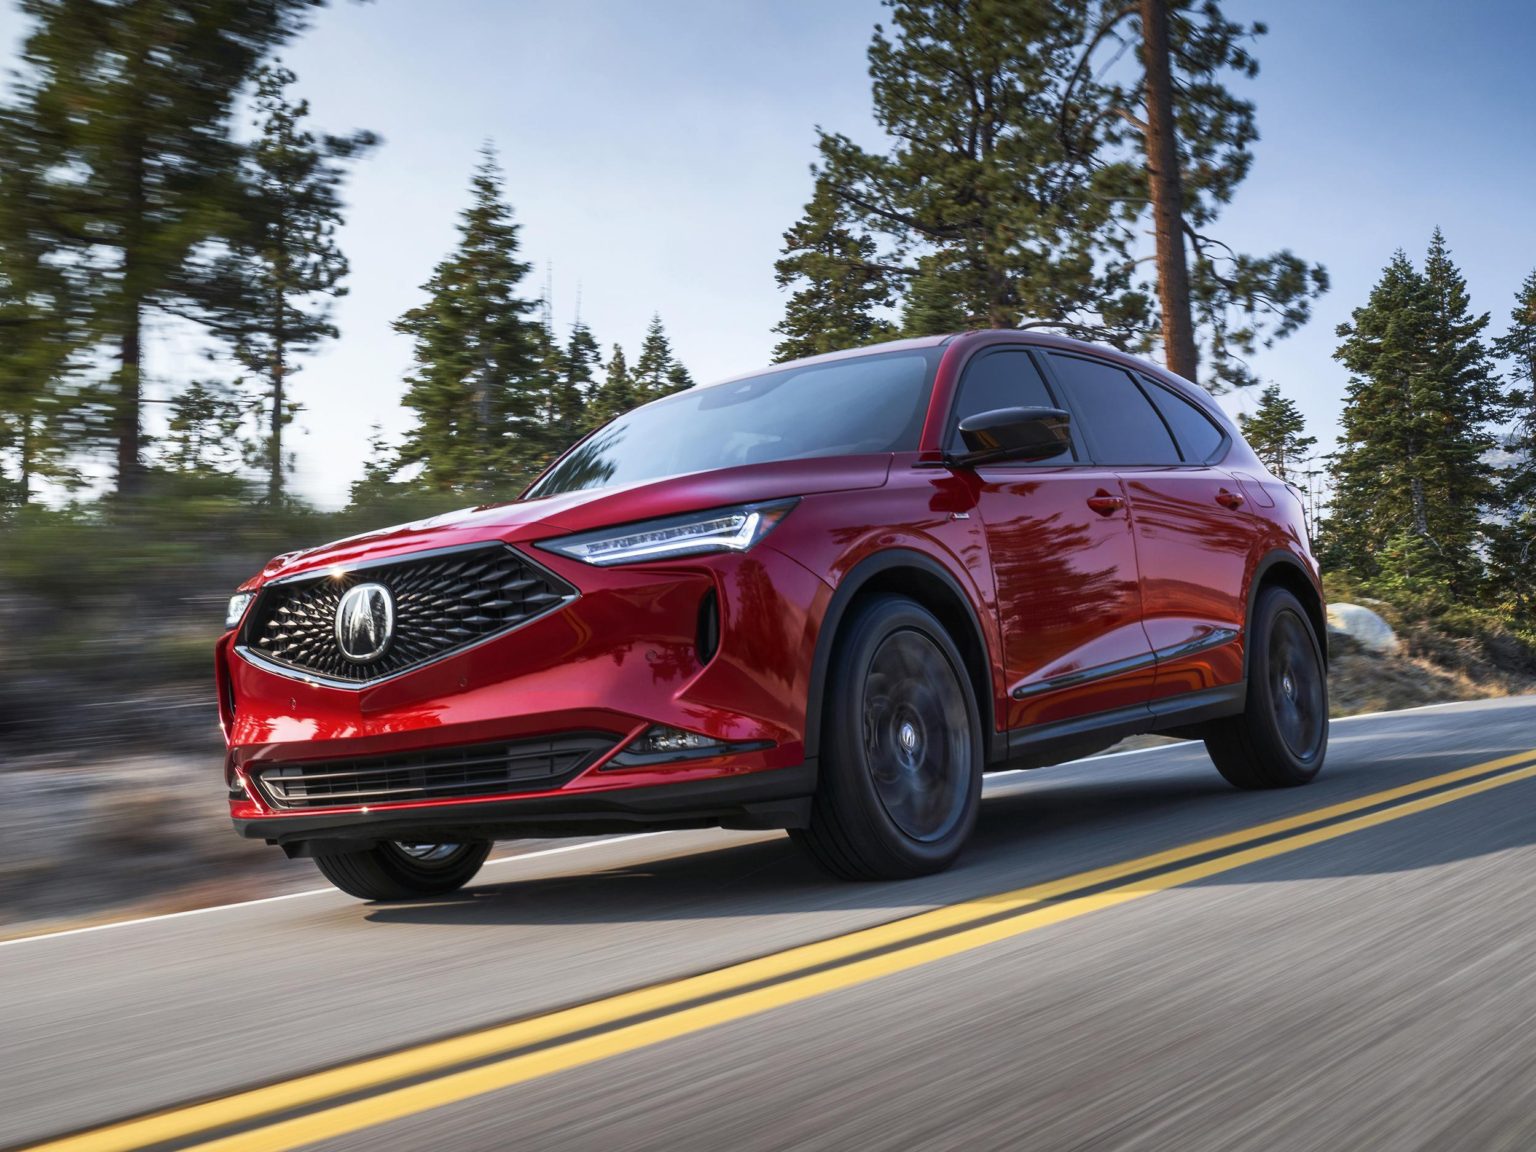 The Acura MDX has been redesigned top to bottom for the 2022 model year.